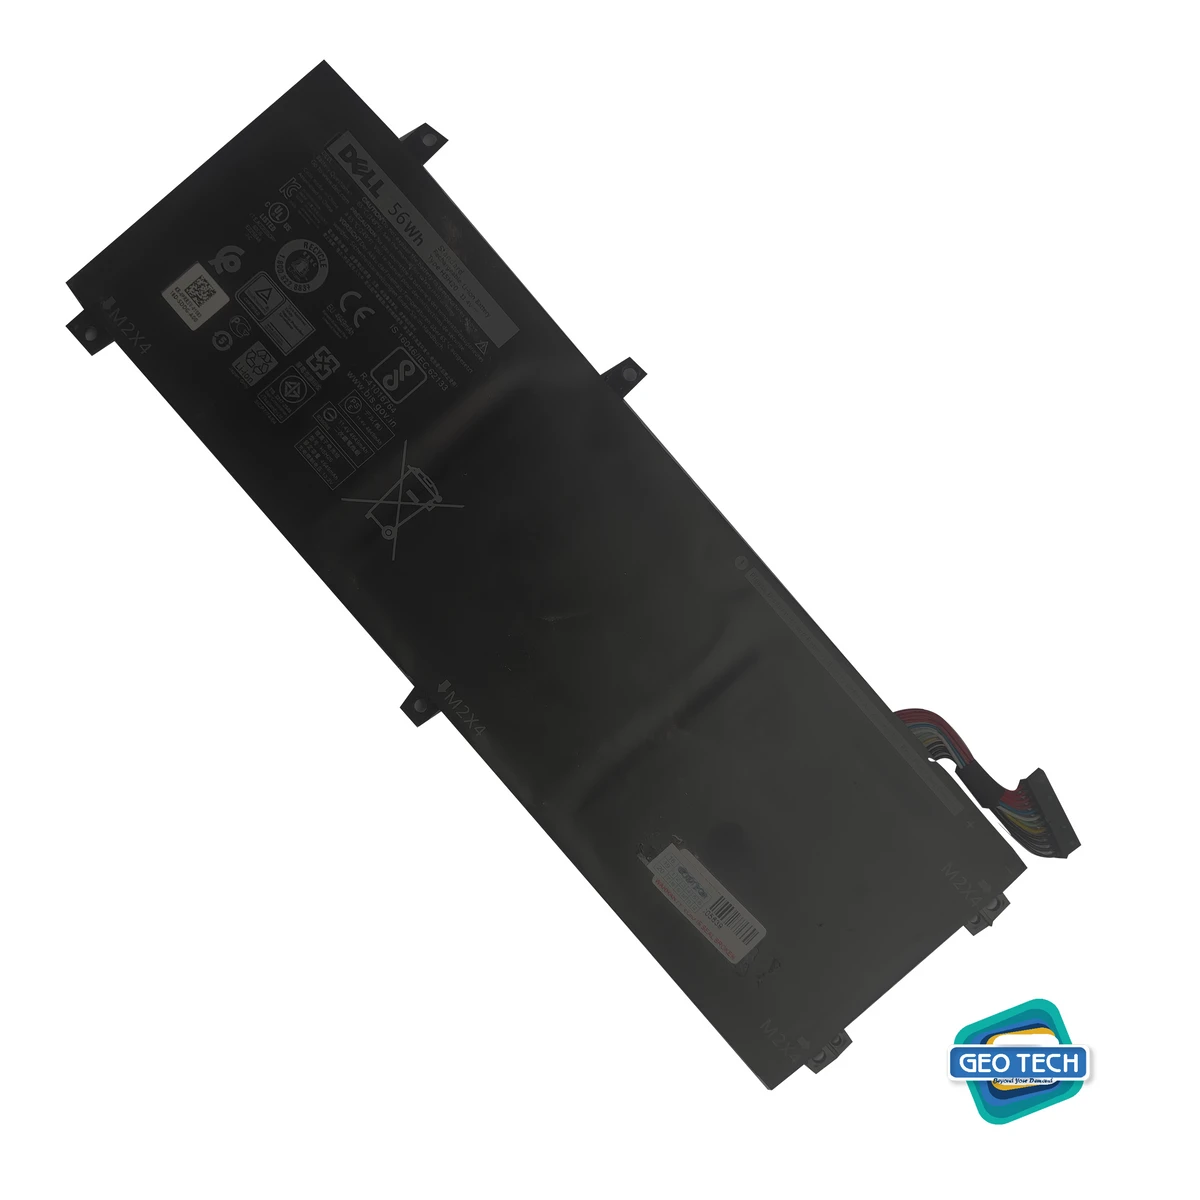 H5H20 11.4V 56Wh Laptop Battery Replace for Dell XPS 15 9560 Precision 5520 Series Notebook 62MJV M7R96